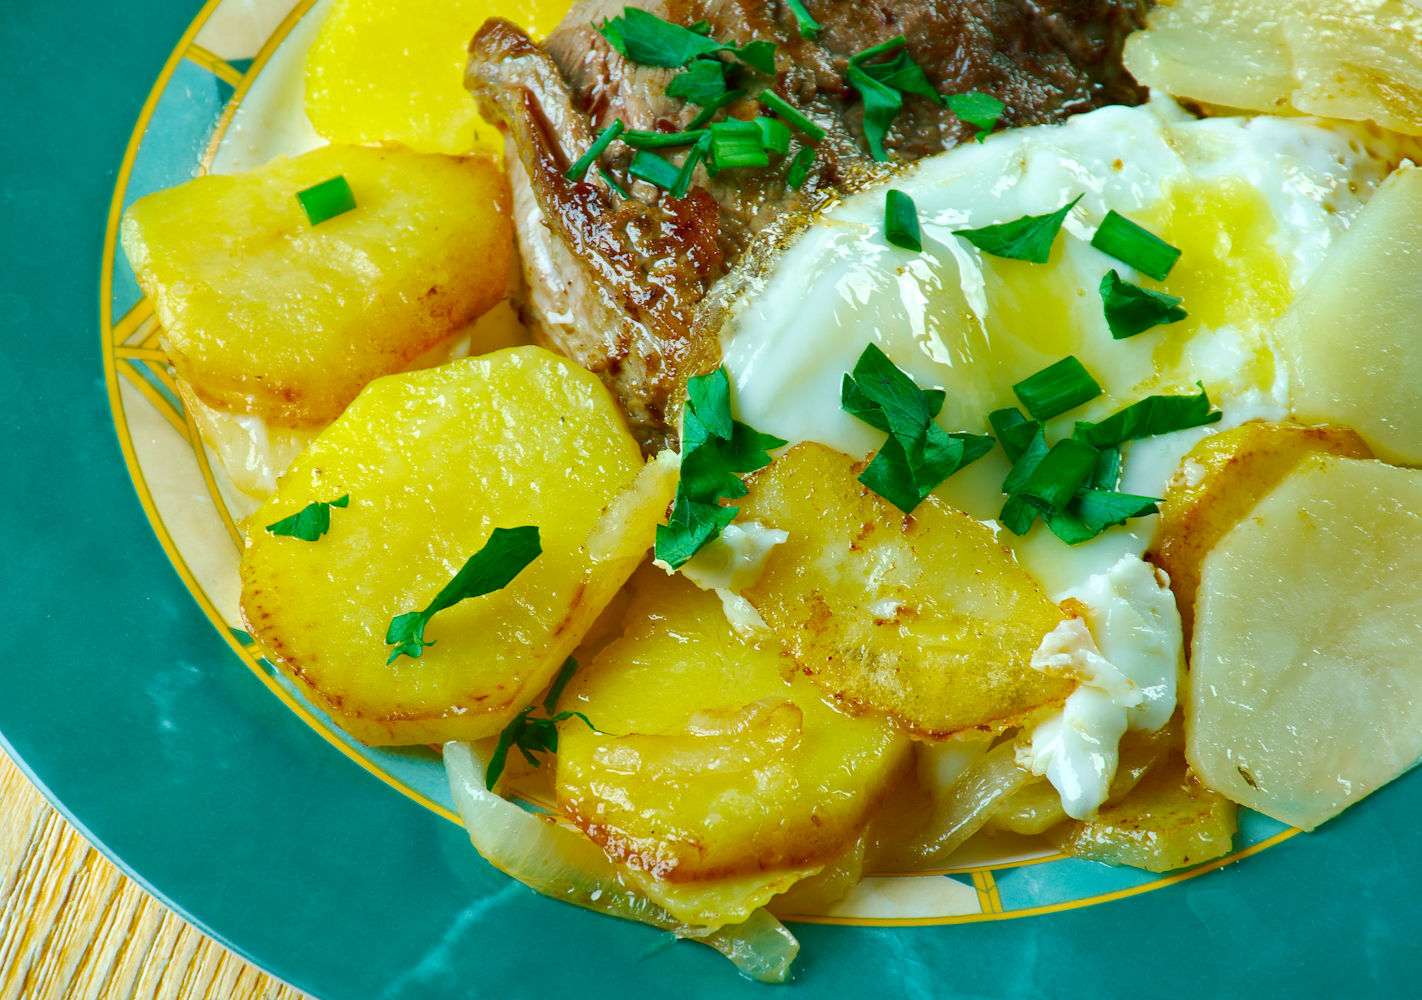 Protein much? Get your fill of meat and eggs with this Portuguese-style steak.